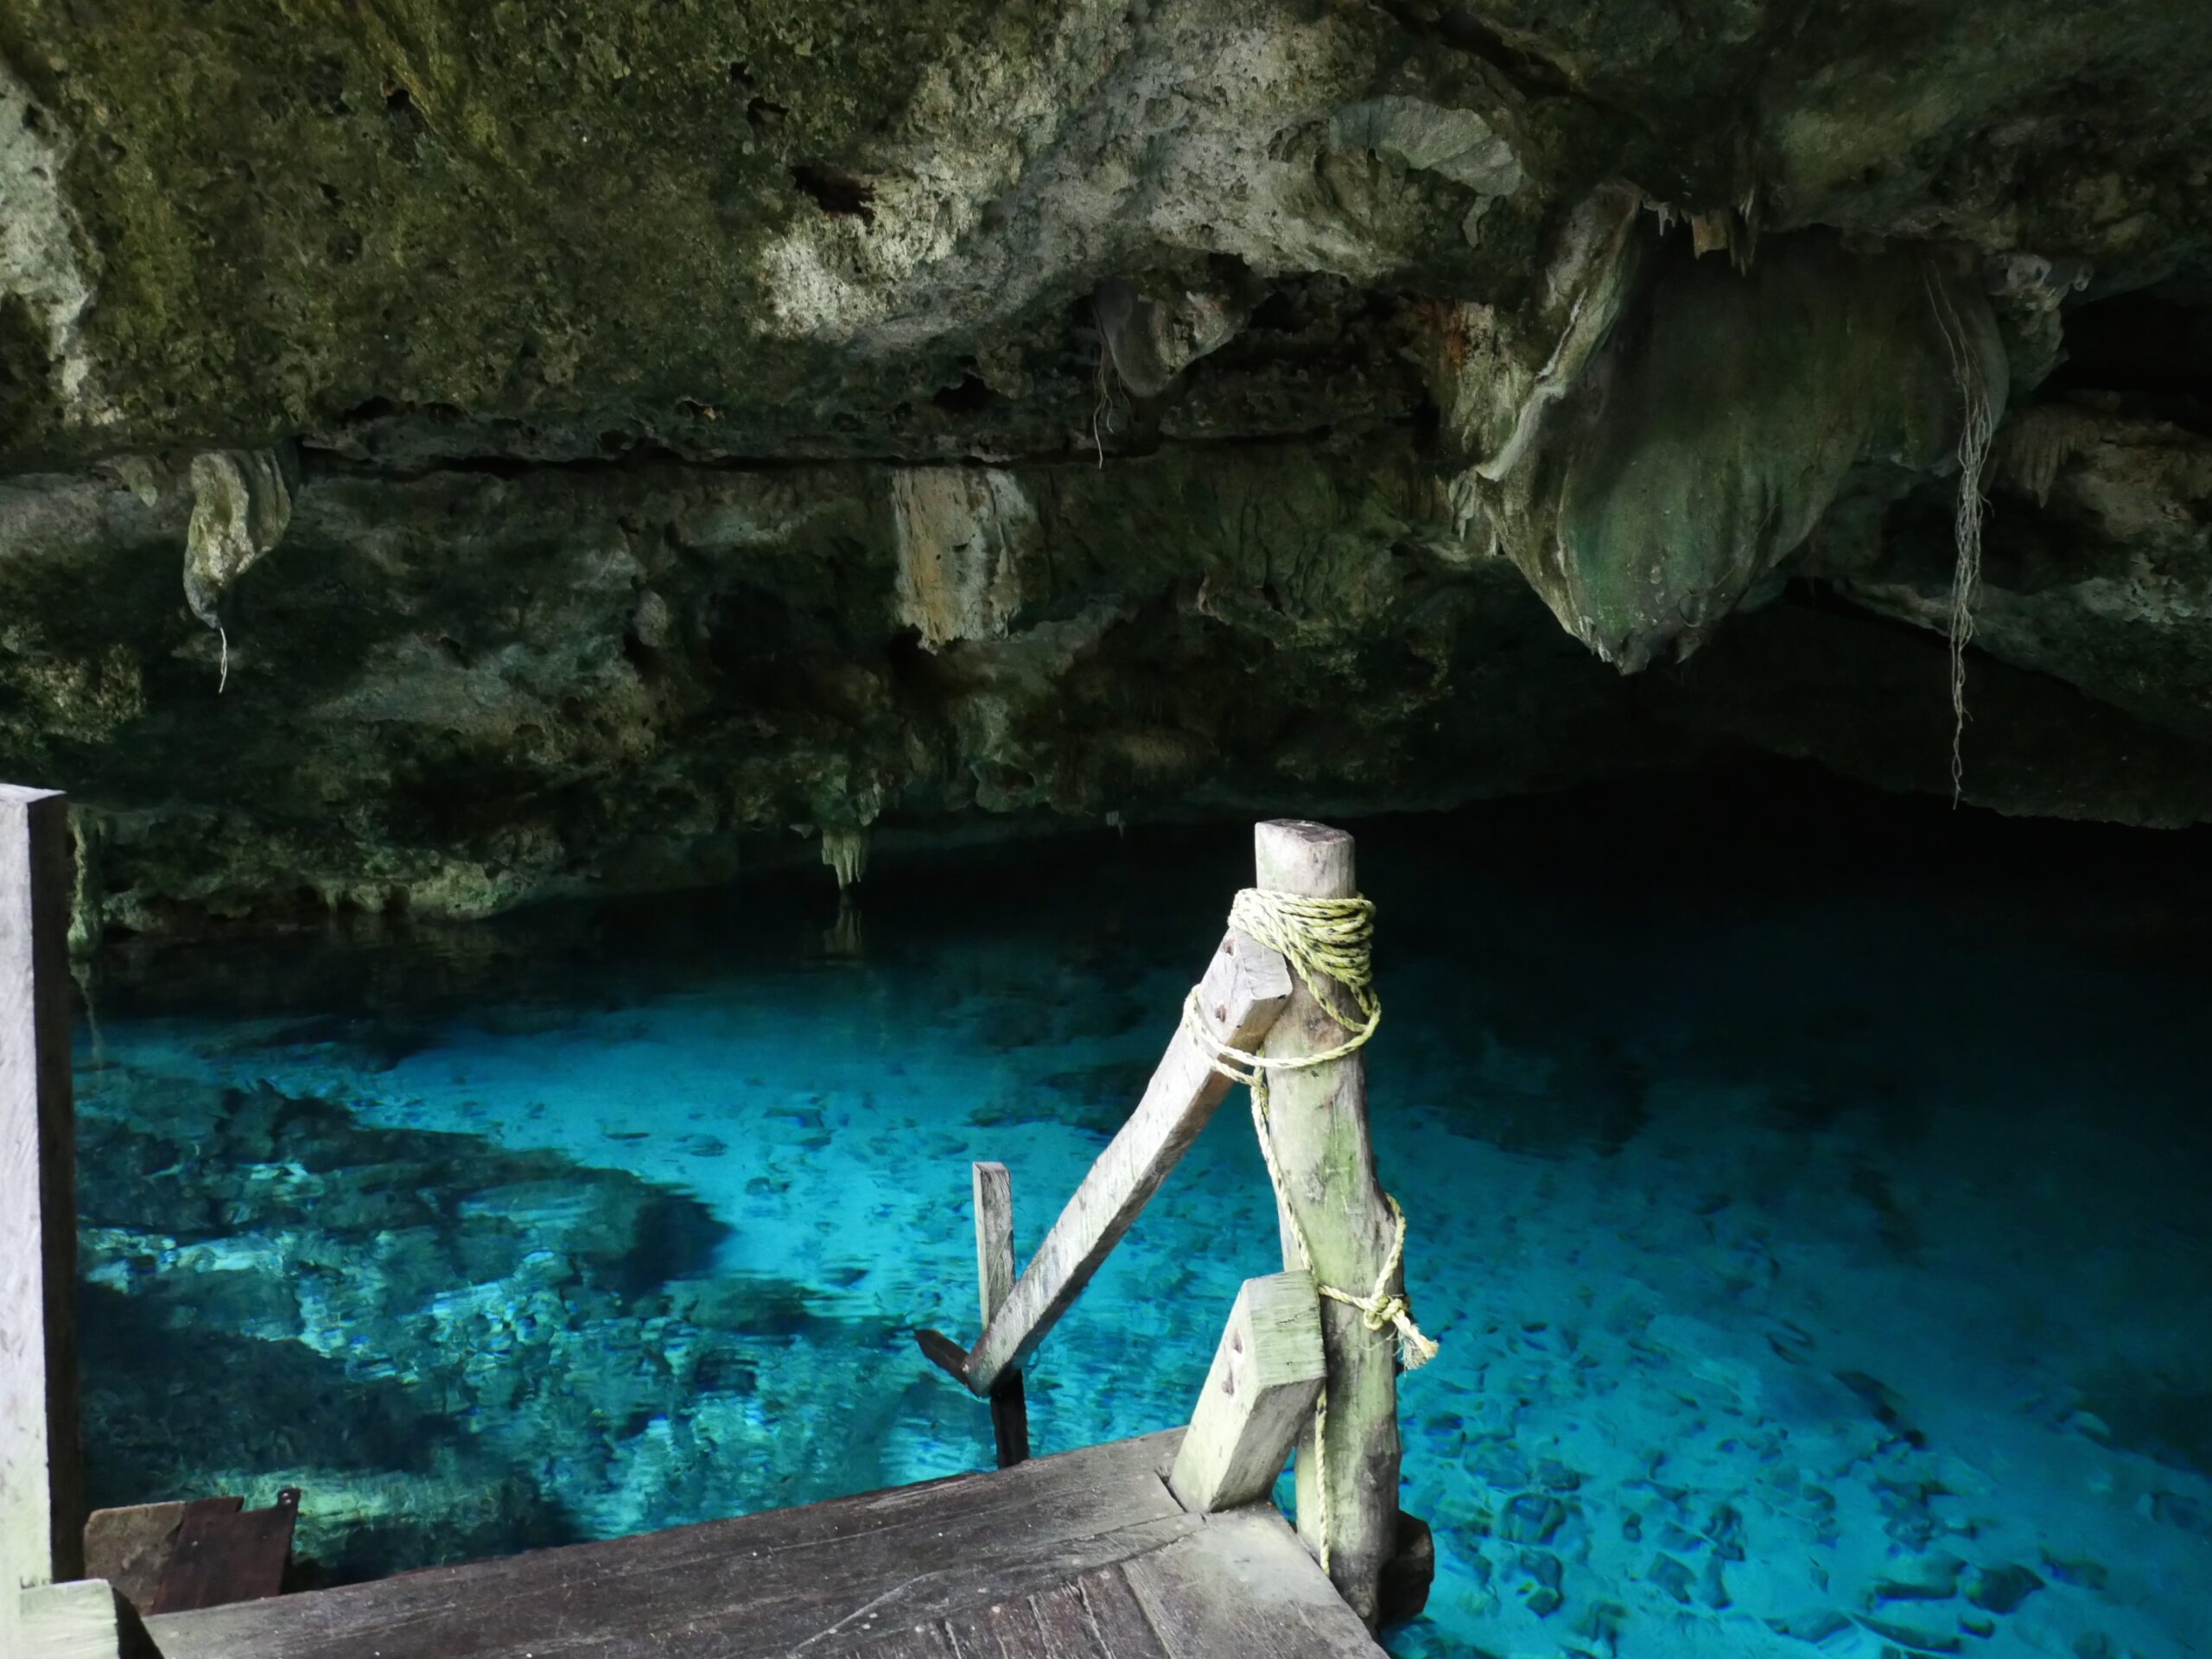 A cenote (limestone sinkhole) for swimming at the Dos Ojos cave system near Cancún, Mexico.